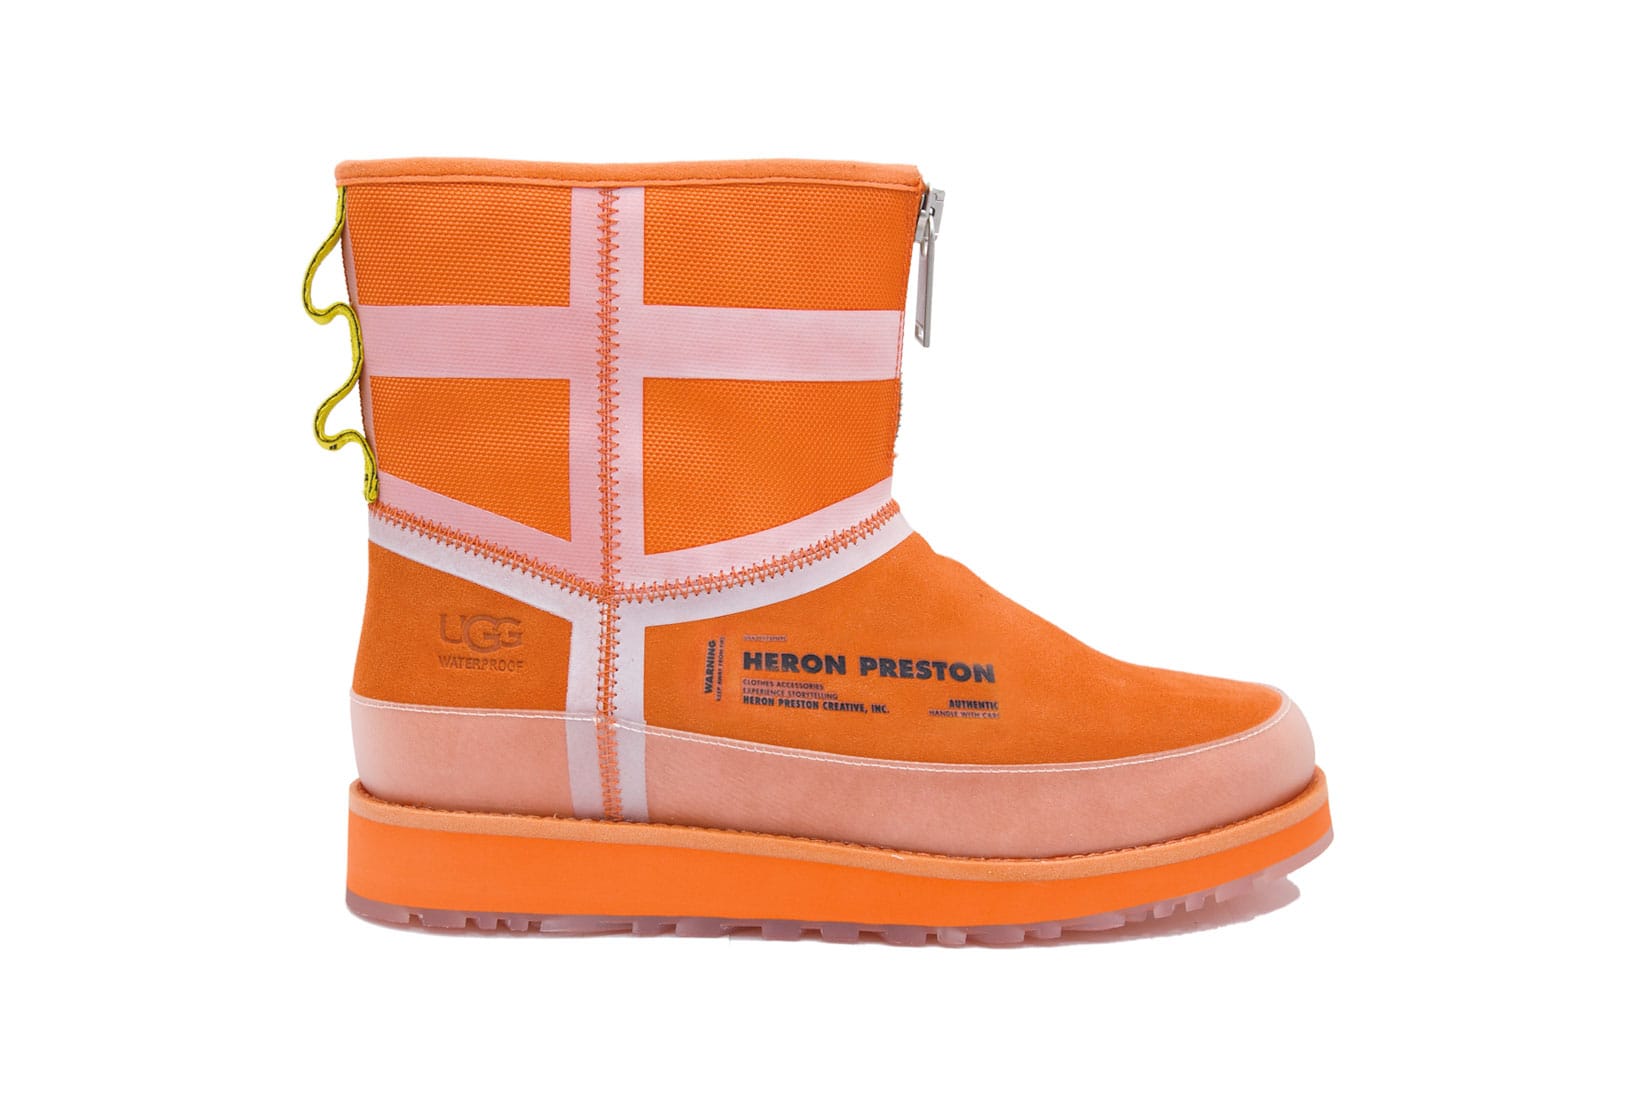 off white ugg boots